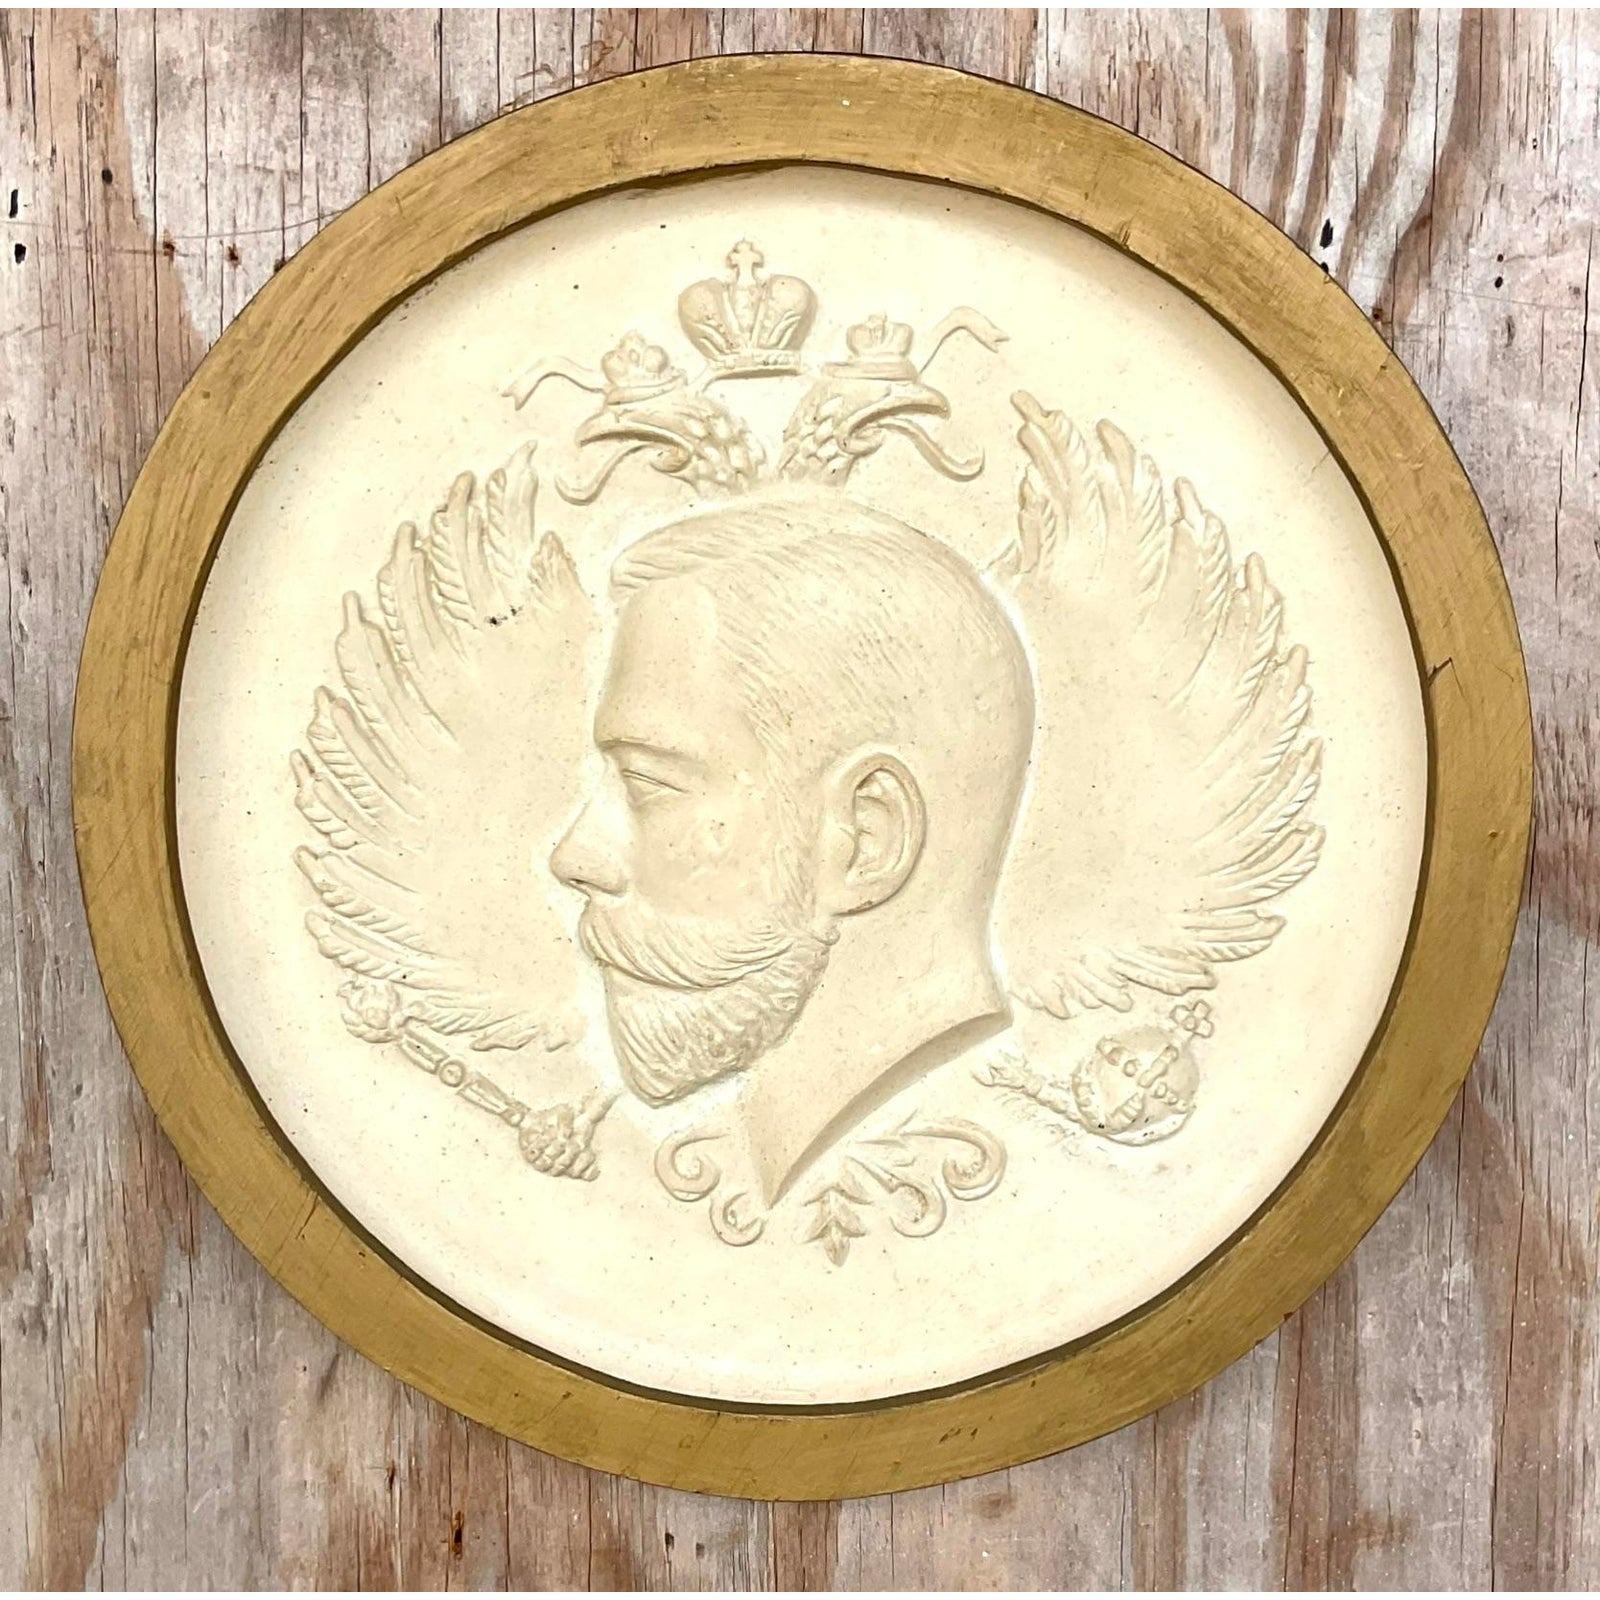 A fabulous vintage Boho medallion. A chic profile of a Russian man. Possibly Czar Nicholas? A beautiful plaster relief with a gilt frame. Acquired from a Palm Beach estate.